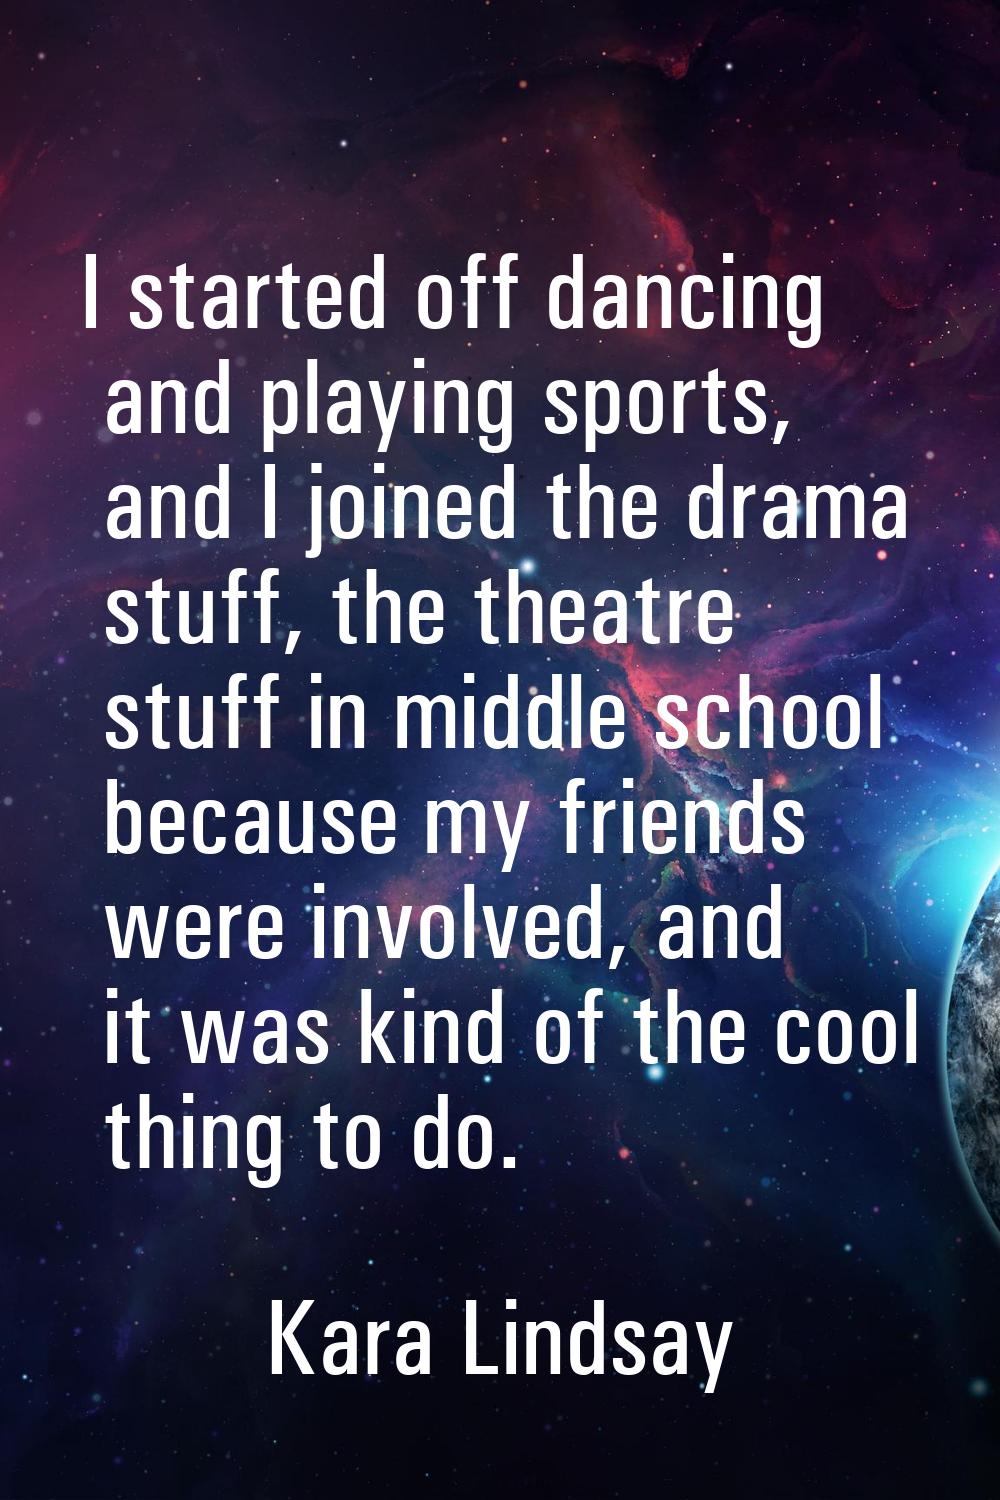 I started off dancing and playing sports, and I joined the drama stuff, the theatre stuff in middle